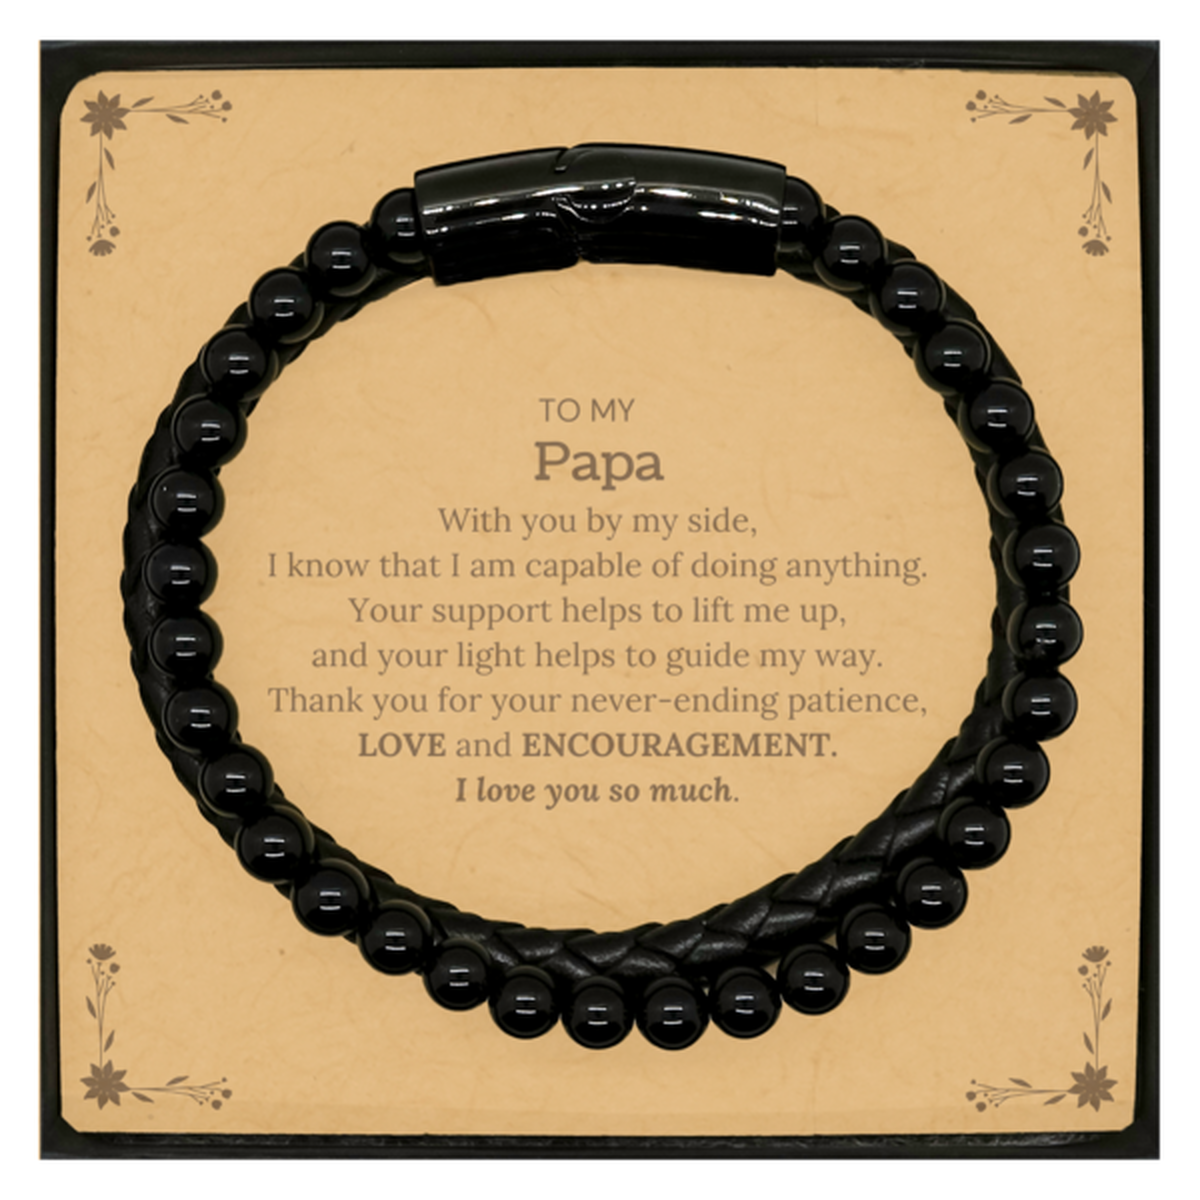 Appreciation Papa Stone Leather Bracelets Gifts, To My Papa Birthday Christmas Wedding Keepsake Gifts for Papa With you by my side, I know that I am capable of doing anything. I love you so much